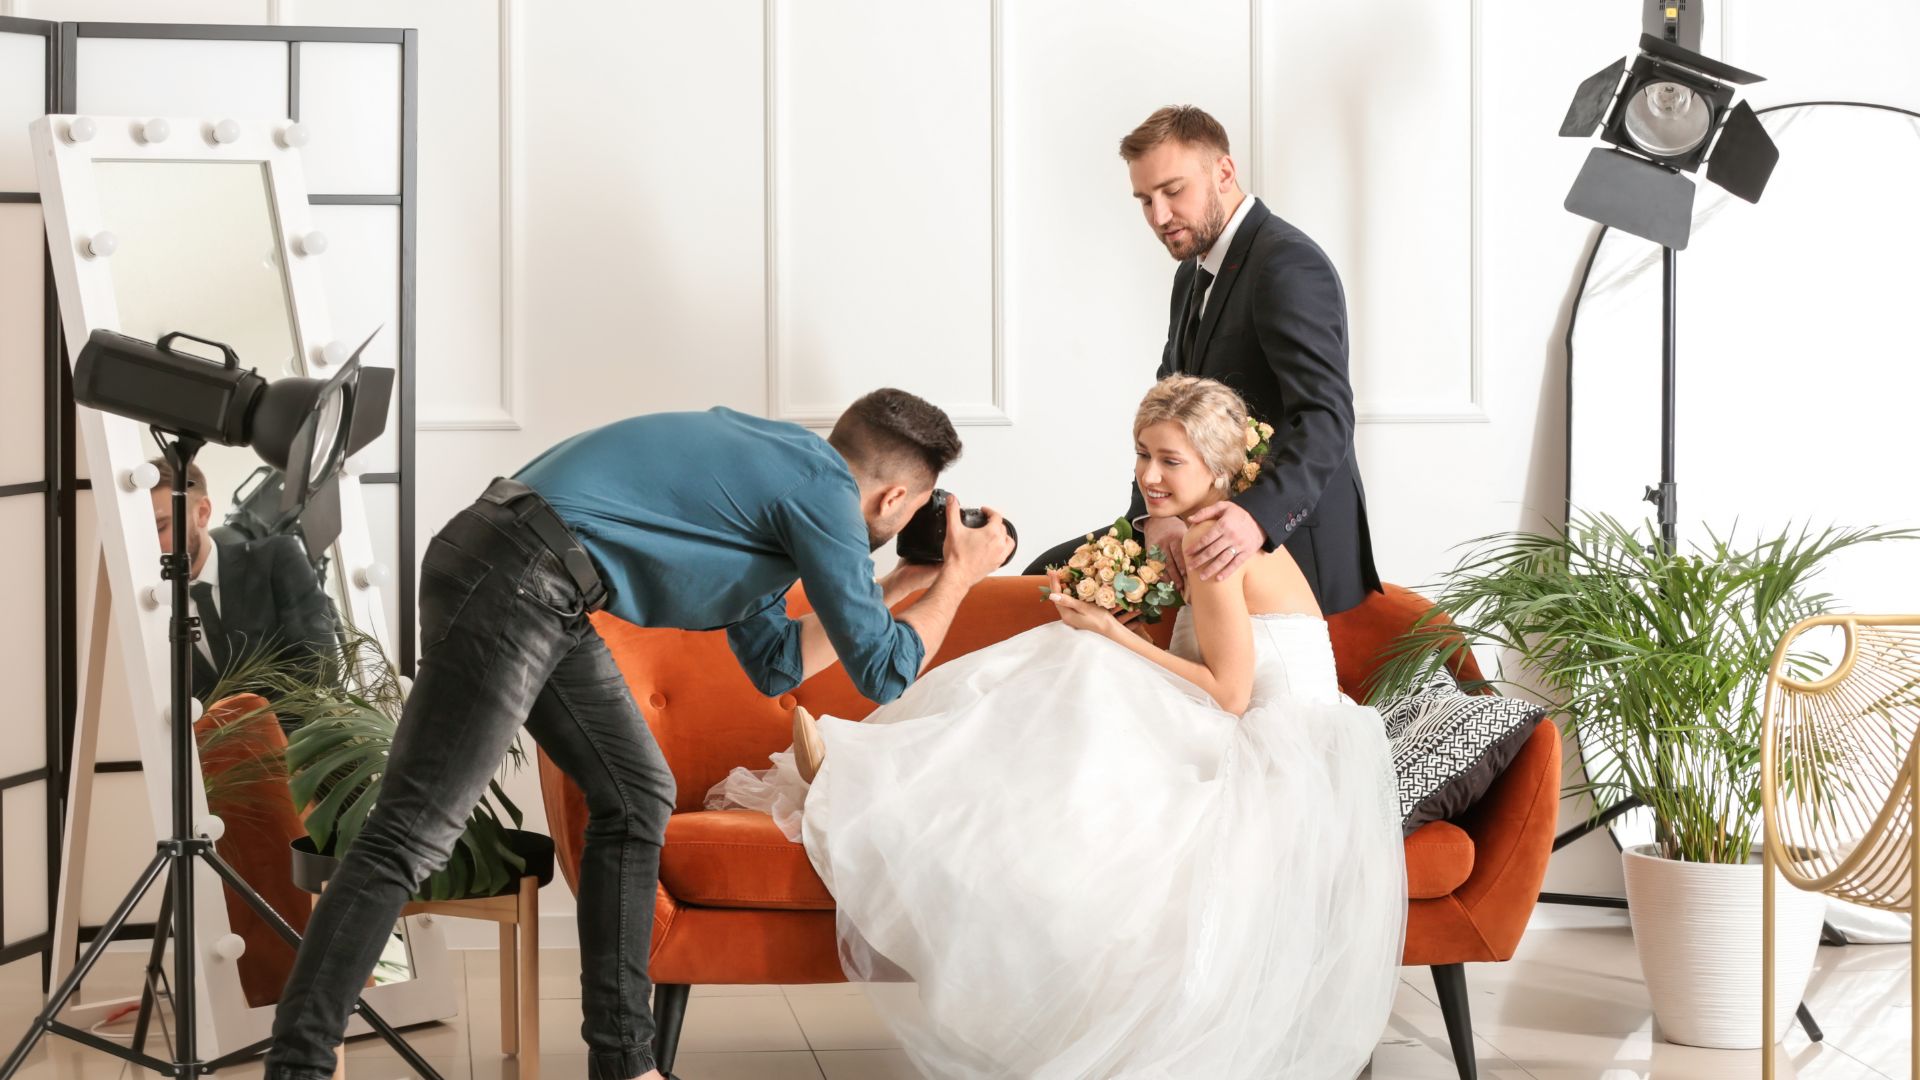 Meet with your photographer to discuss your wedding video and photo shot list